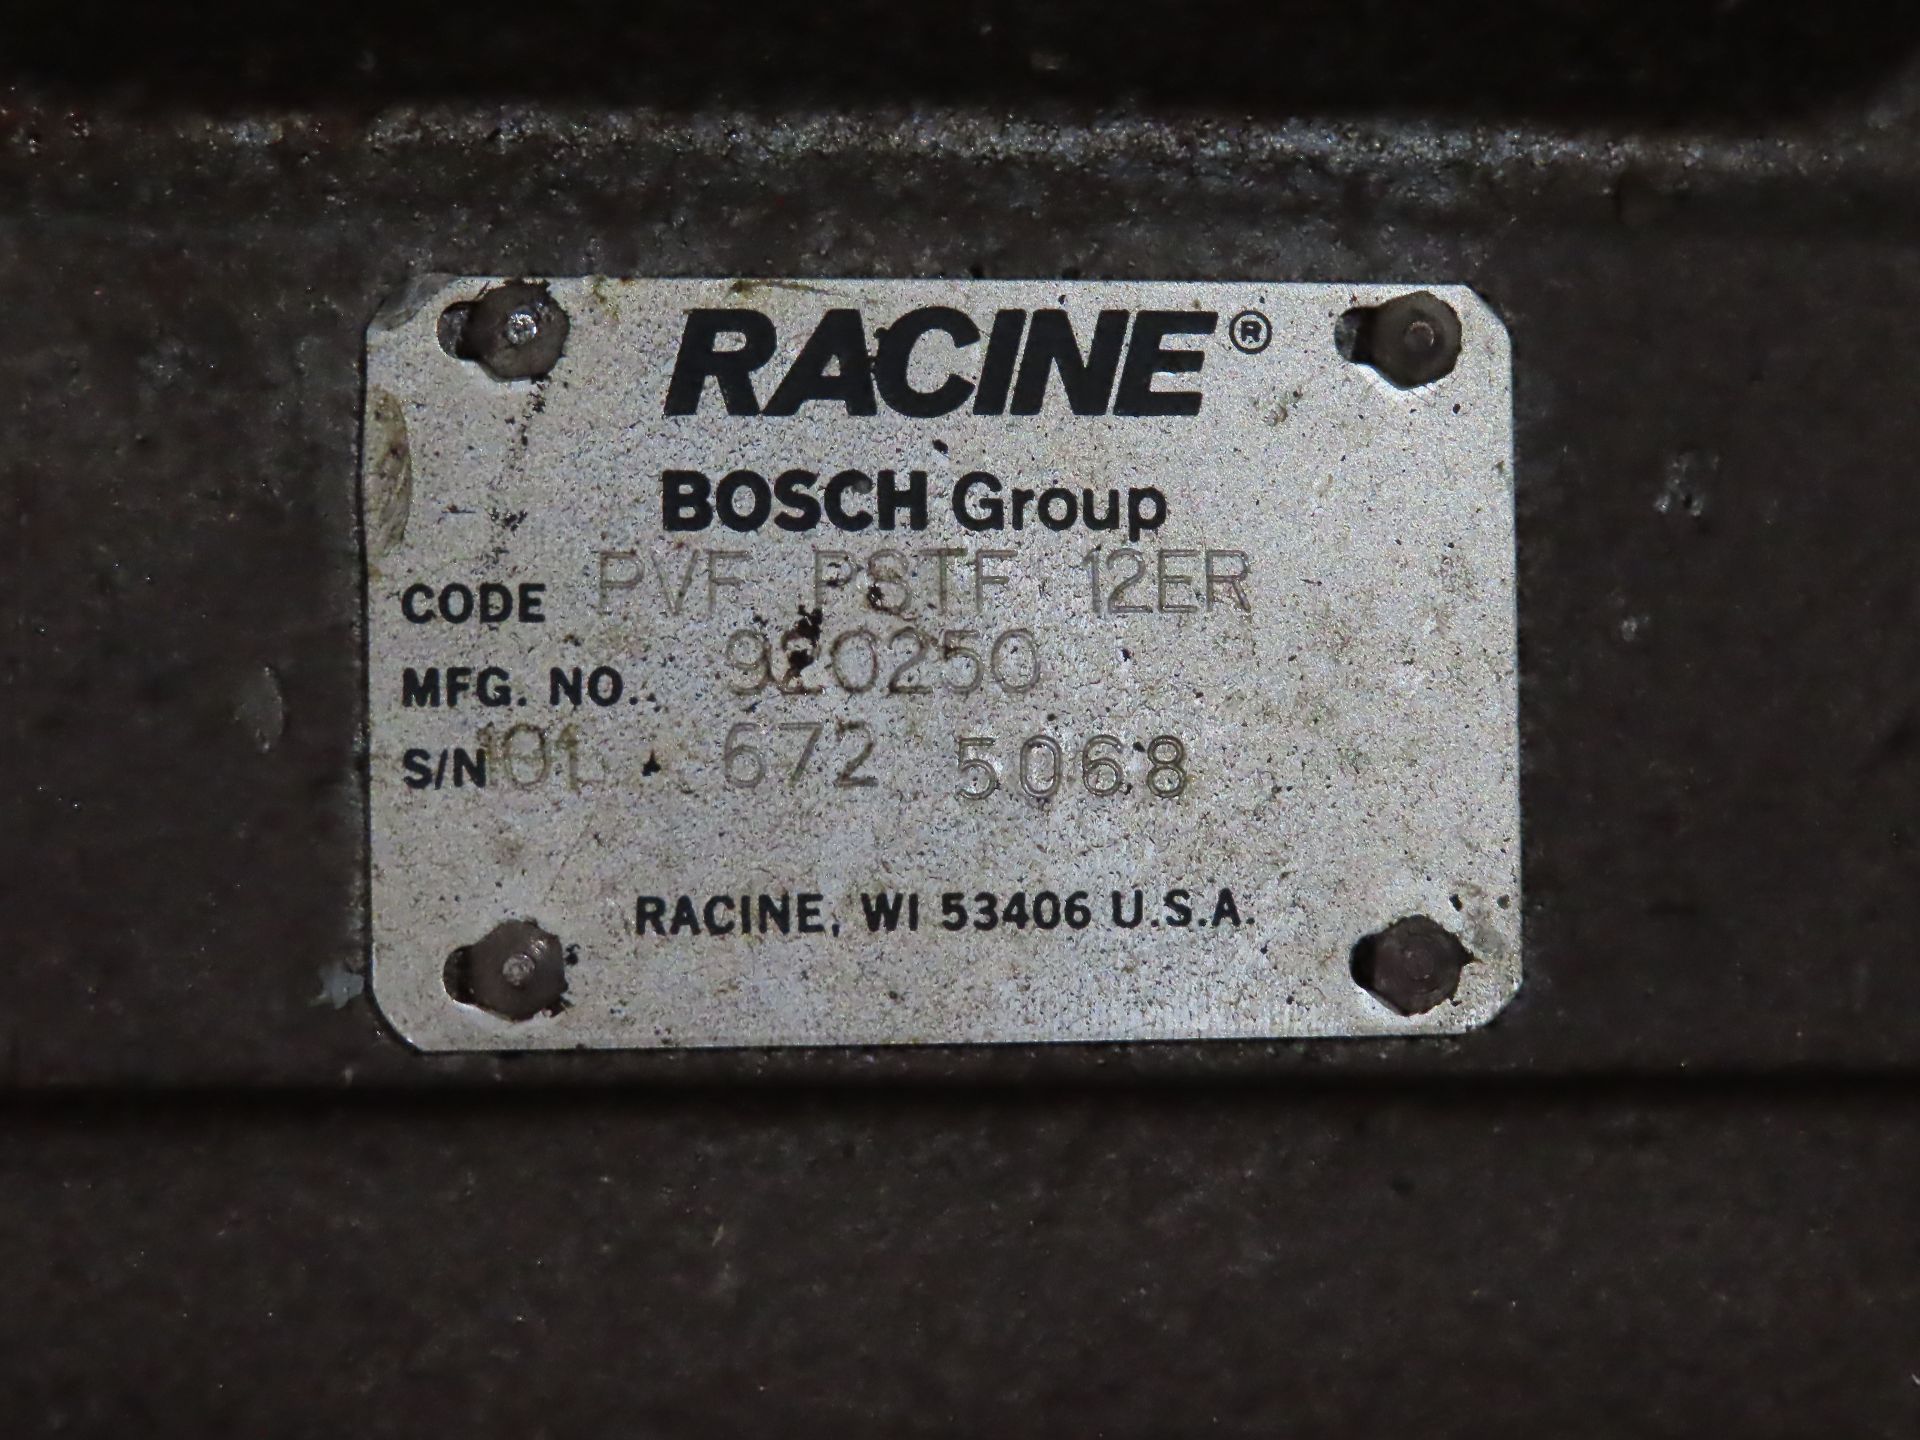 Racine model PVF-PSTF-12ER, used parts crib spare, as always with Brolyn LLC auctions, all lots - Image 2 of 2